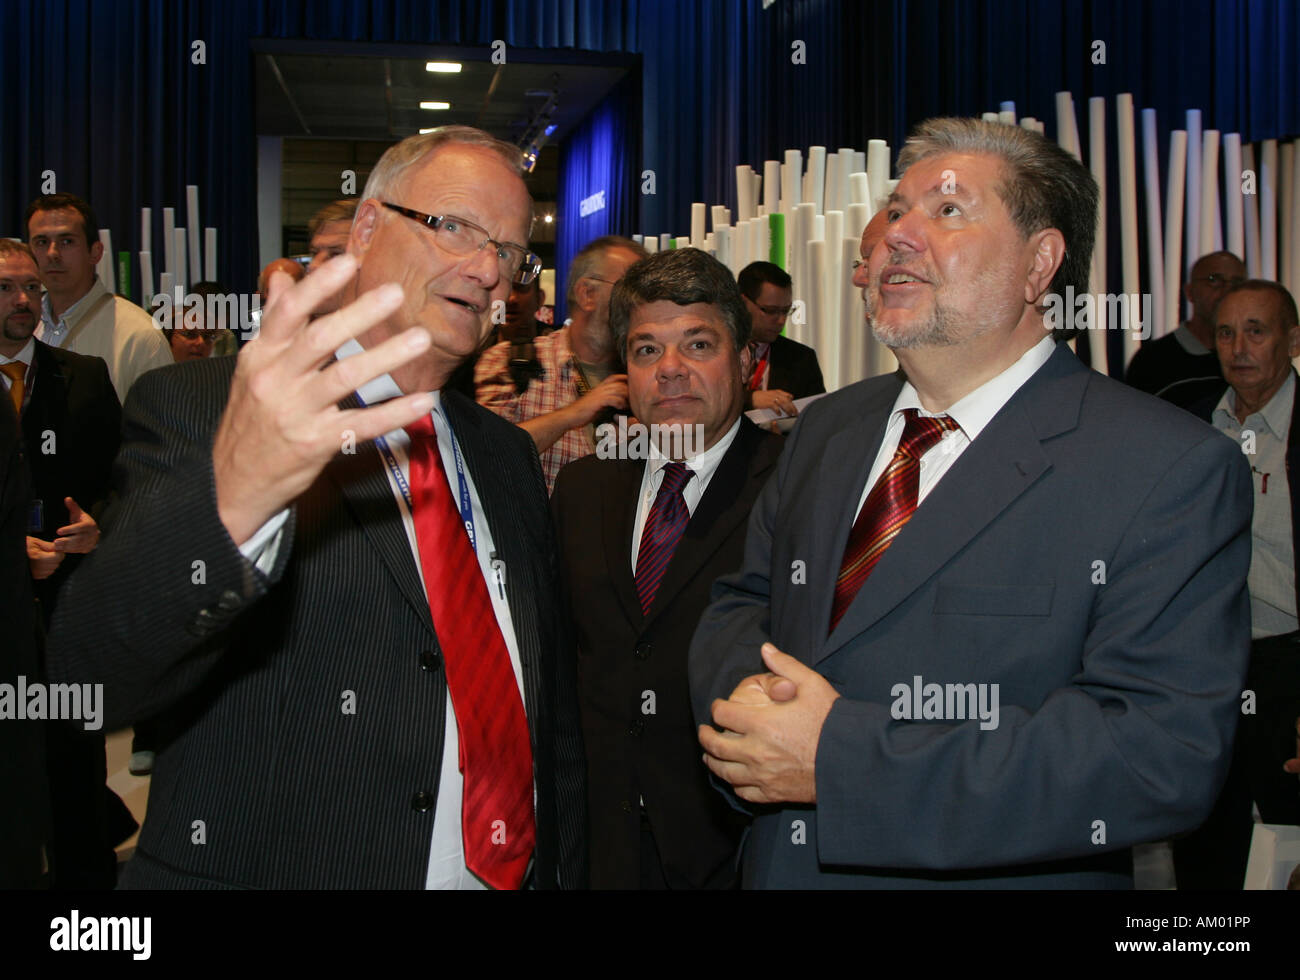 Prime minister of Rhineland-Palatinate Kurt Beck during the IFA with the Grundig-Chairman Hans-Peter Haase in Berlin, Germany Stock Photo